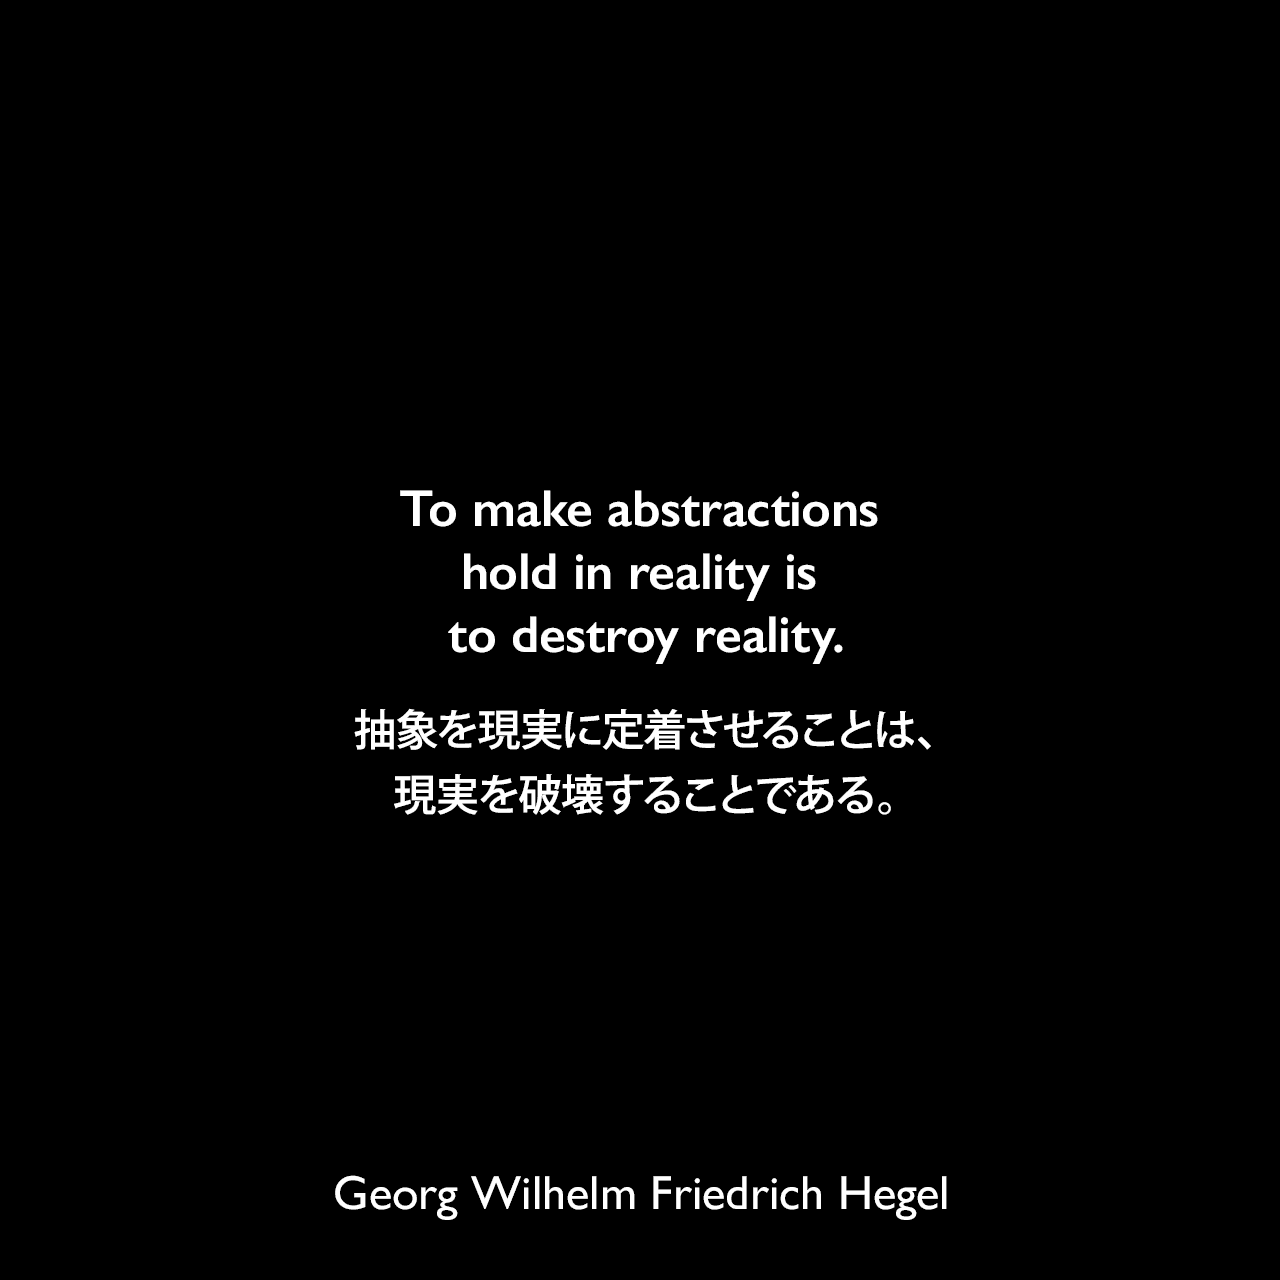 To make abstractions hold in reality is to destroy reality.抽象を現実に定着させることは、現実を破壊することである。- ヘーゲルによる本「Lectures on the Philosophy of History」よりGeorg Wilhelm Friedrich Hegel